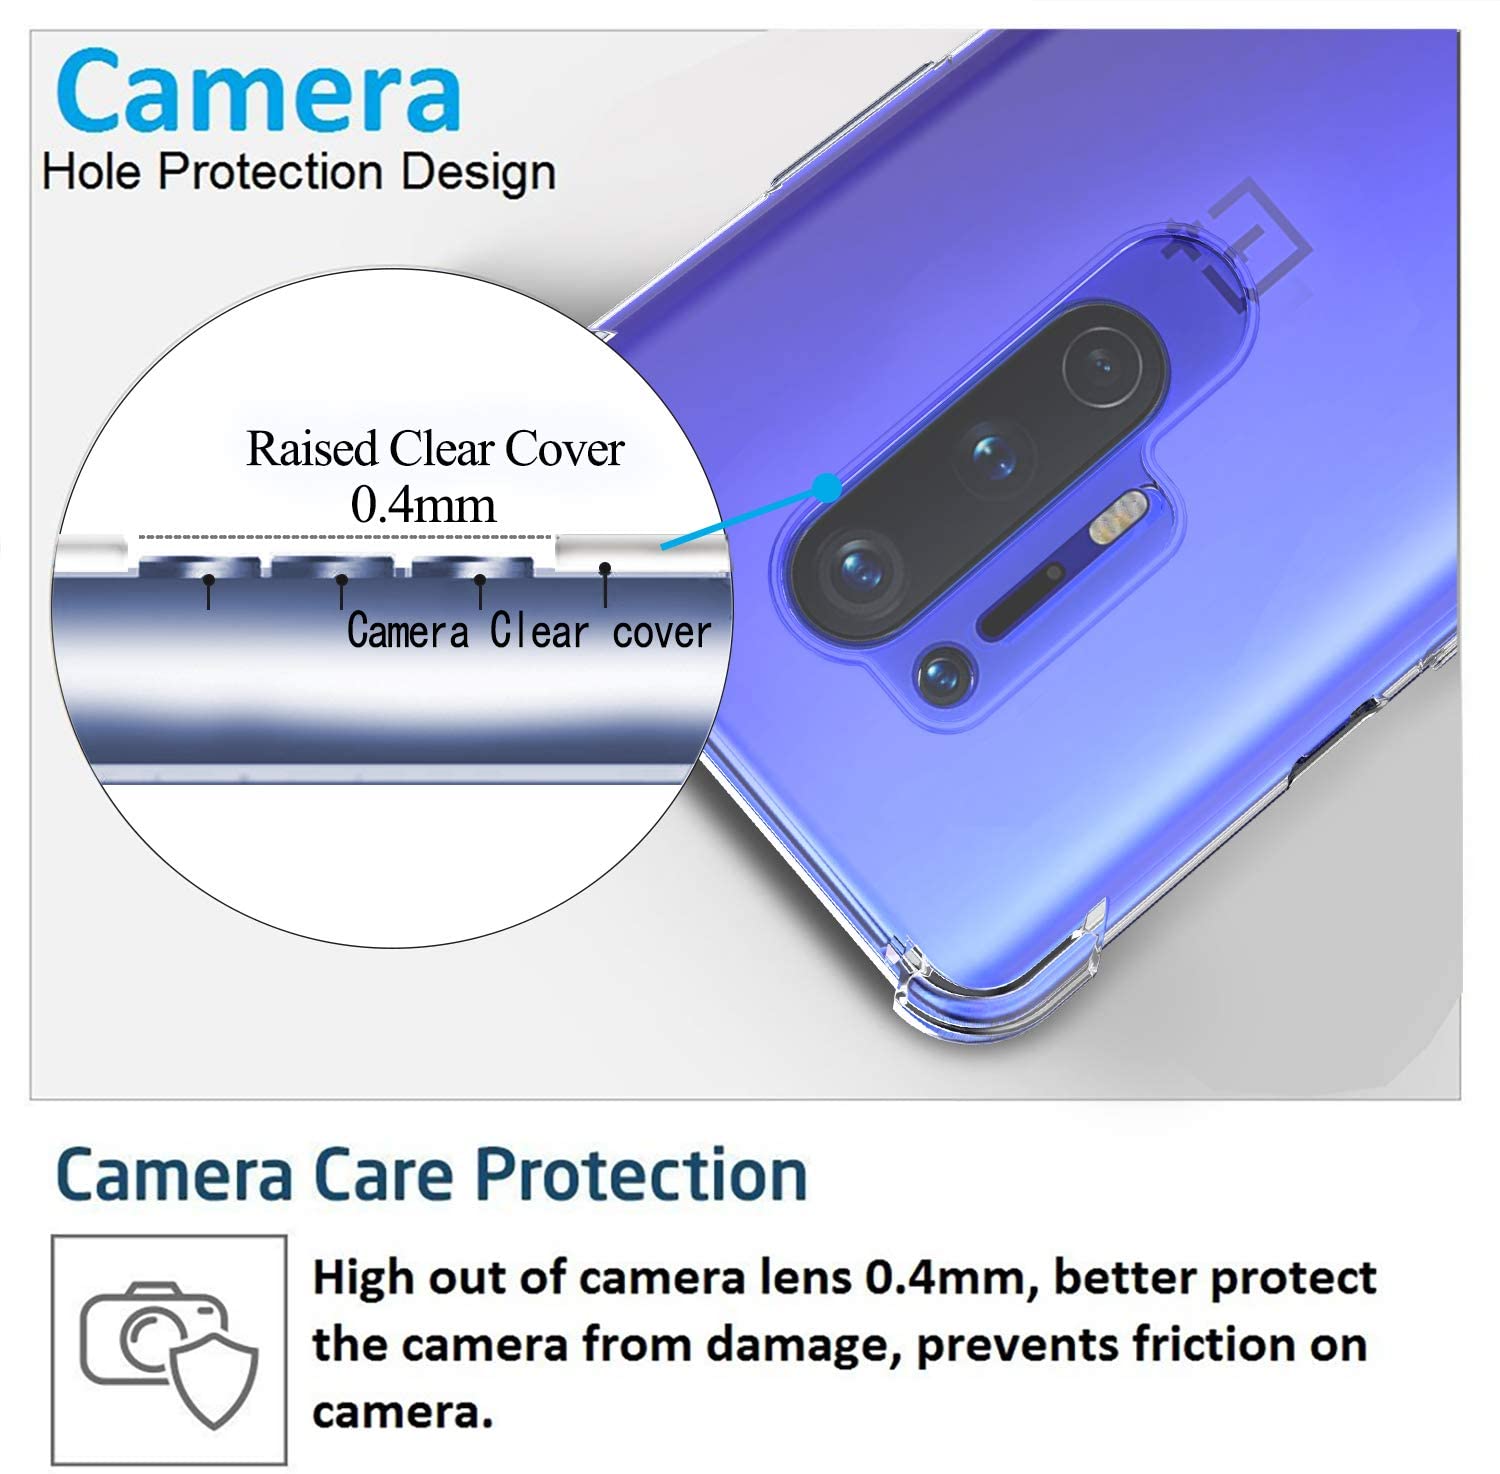 Shockproof Soft TPU Rubber Skin Silicone Protective case for OnePlus 7T